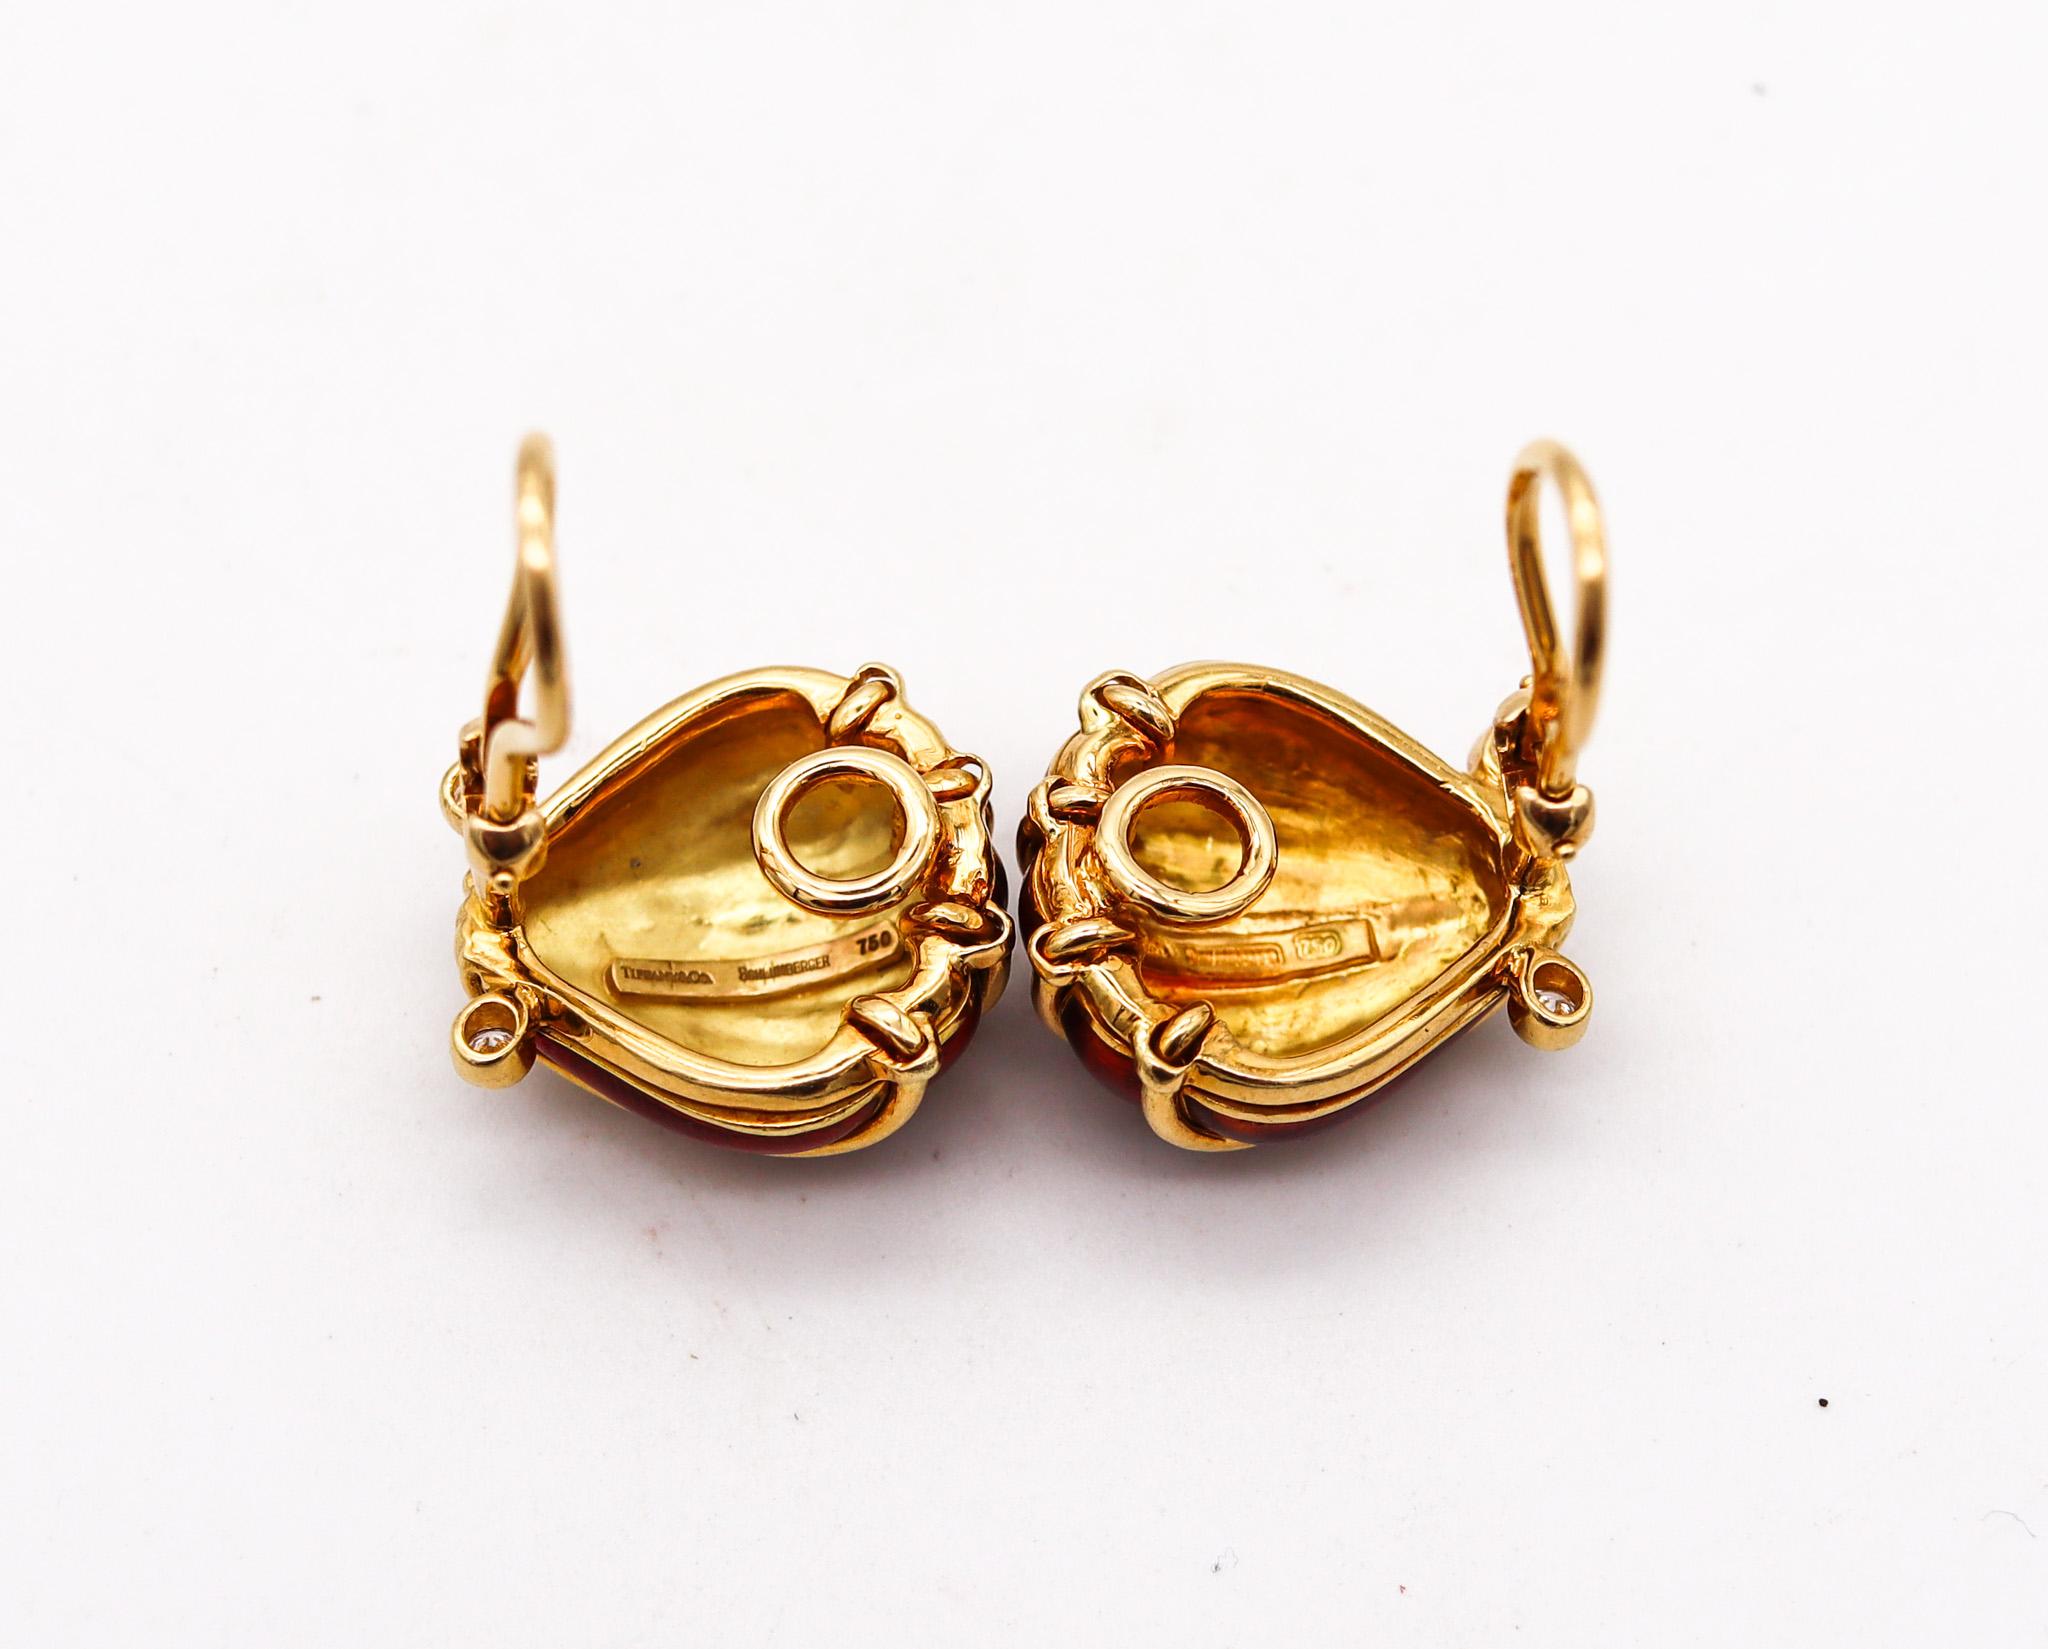 Brilliant Cut Tiffany & Co. 1970 Schlumberger Enameled Earrings In 18Kt Gold With Diamonds For Sale